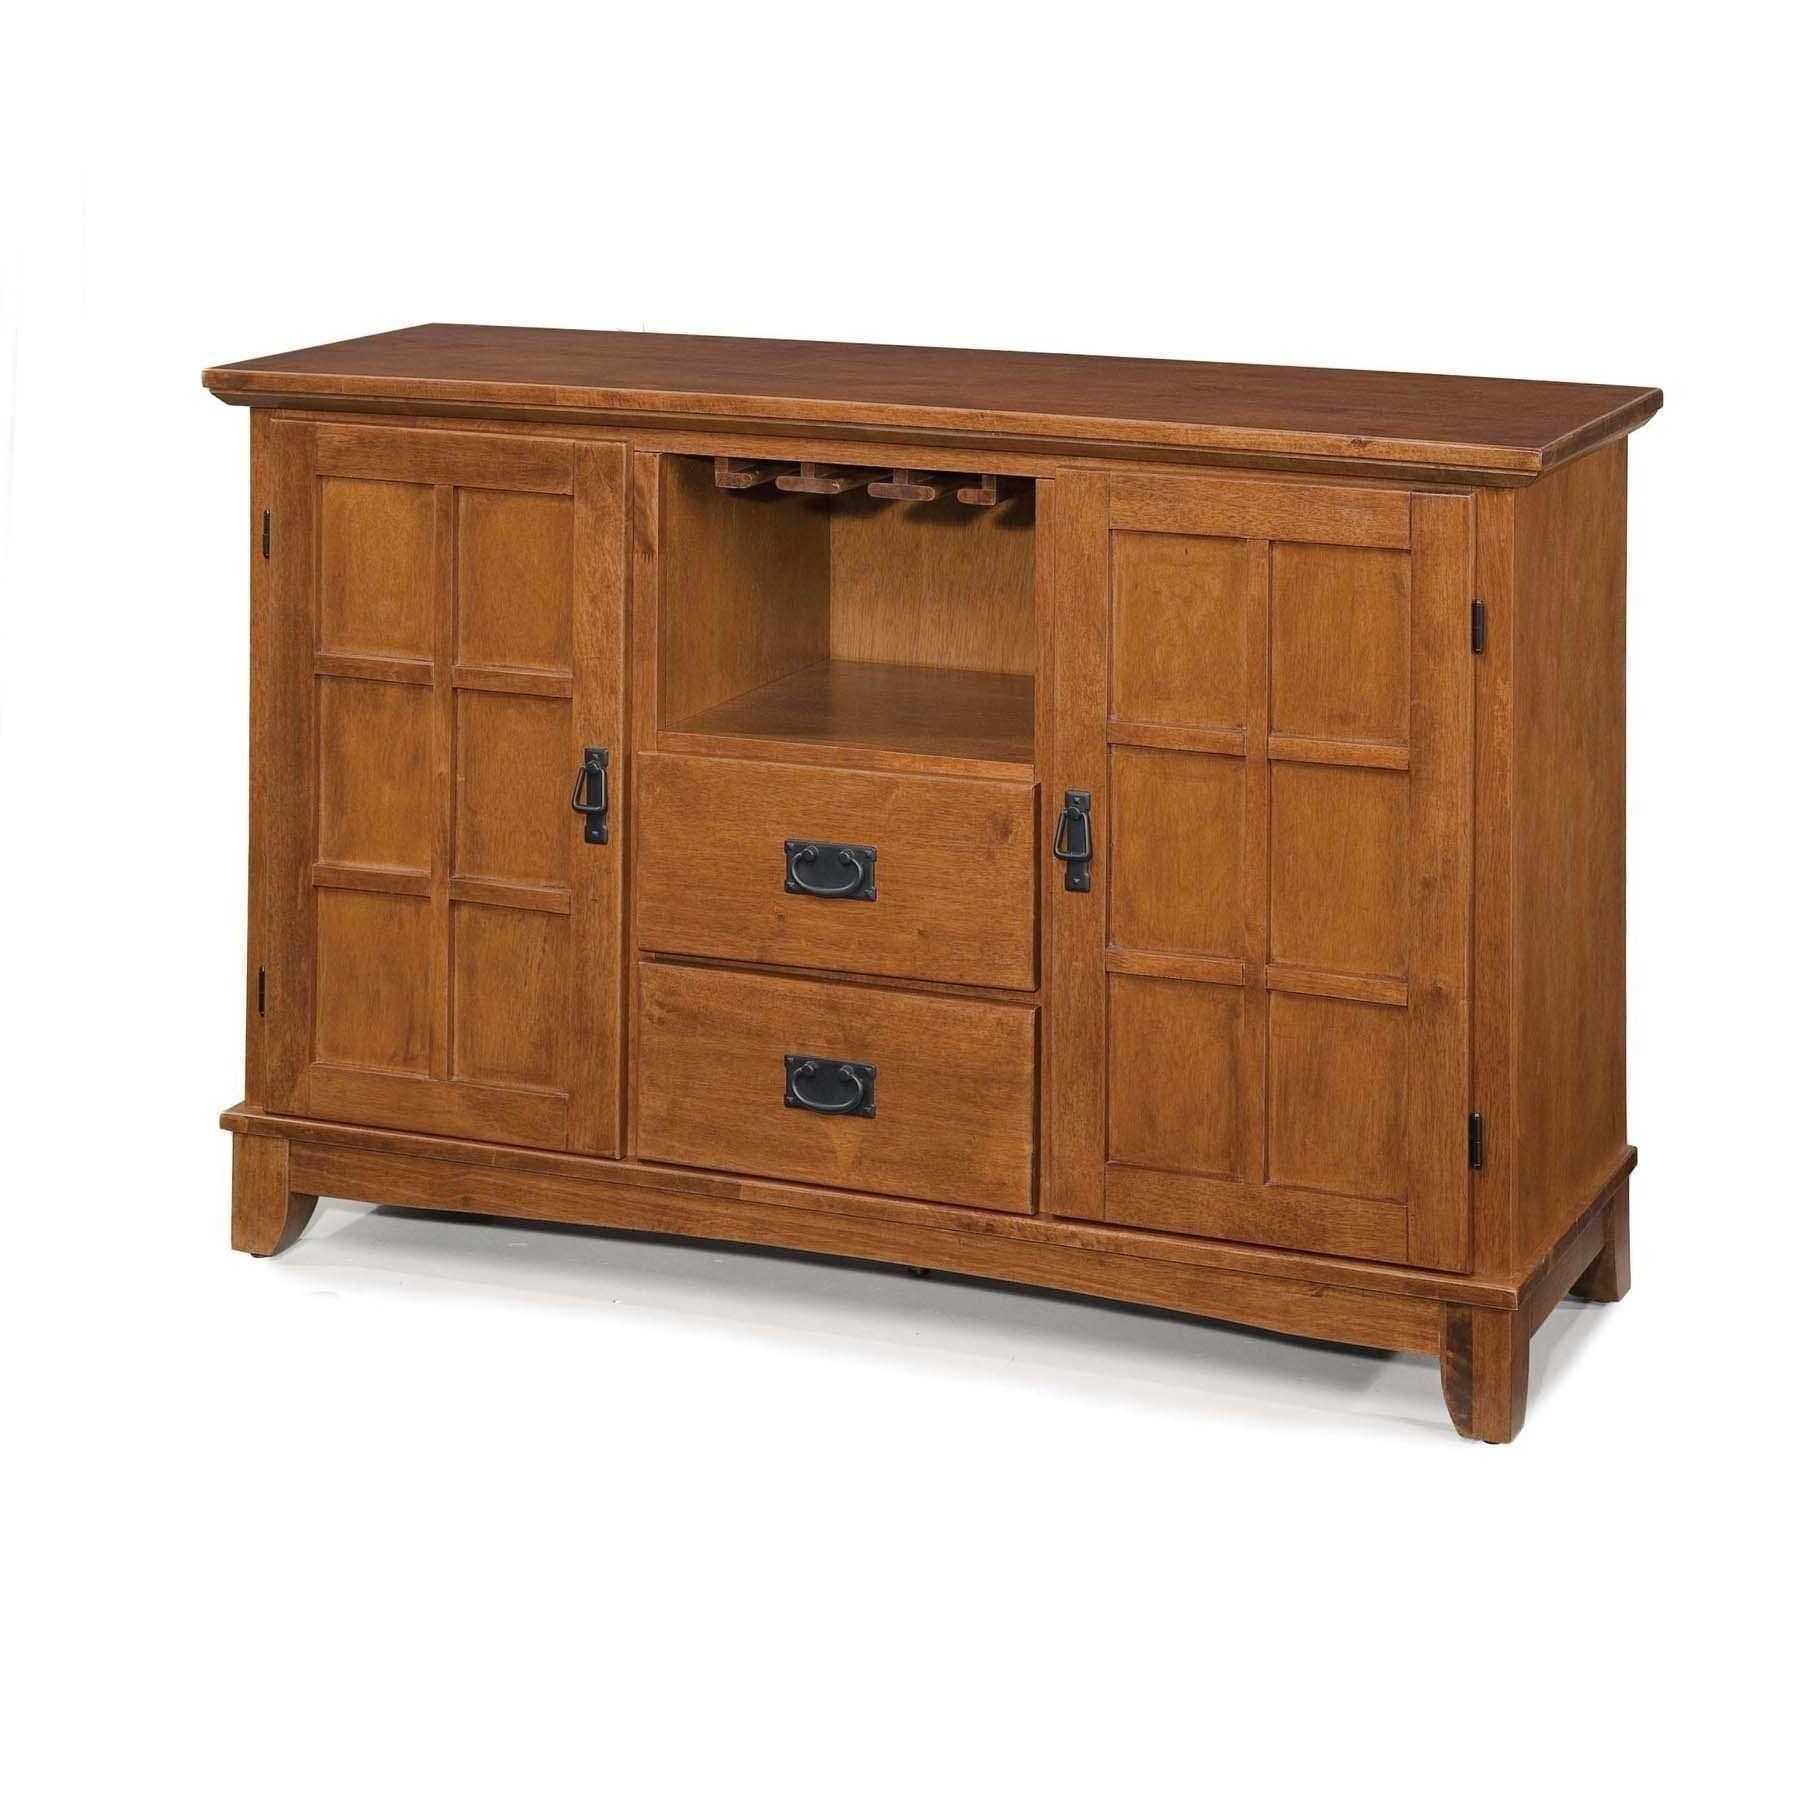 Craftsman Sideboards Within Popular Traditional Dining Room Sideboards And Buffets New Buy Mission (View 15 of 20)